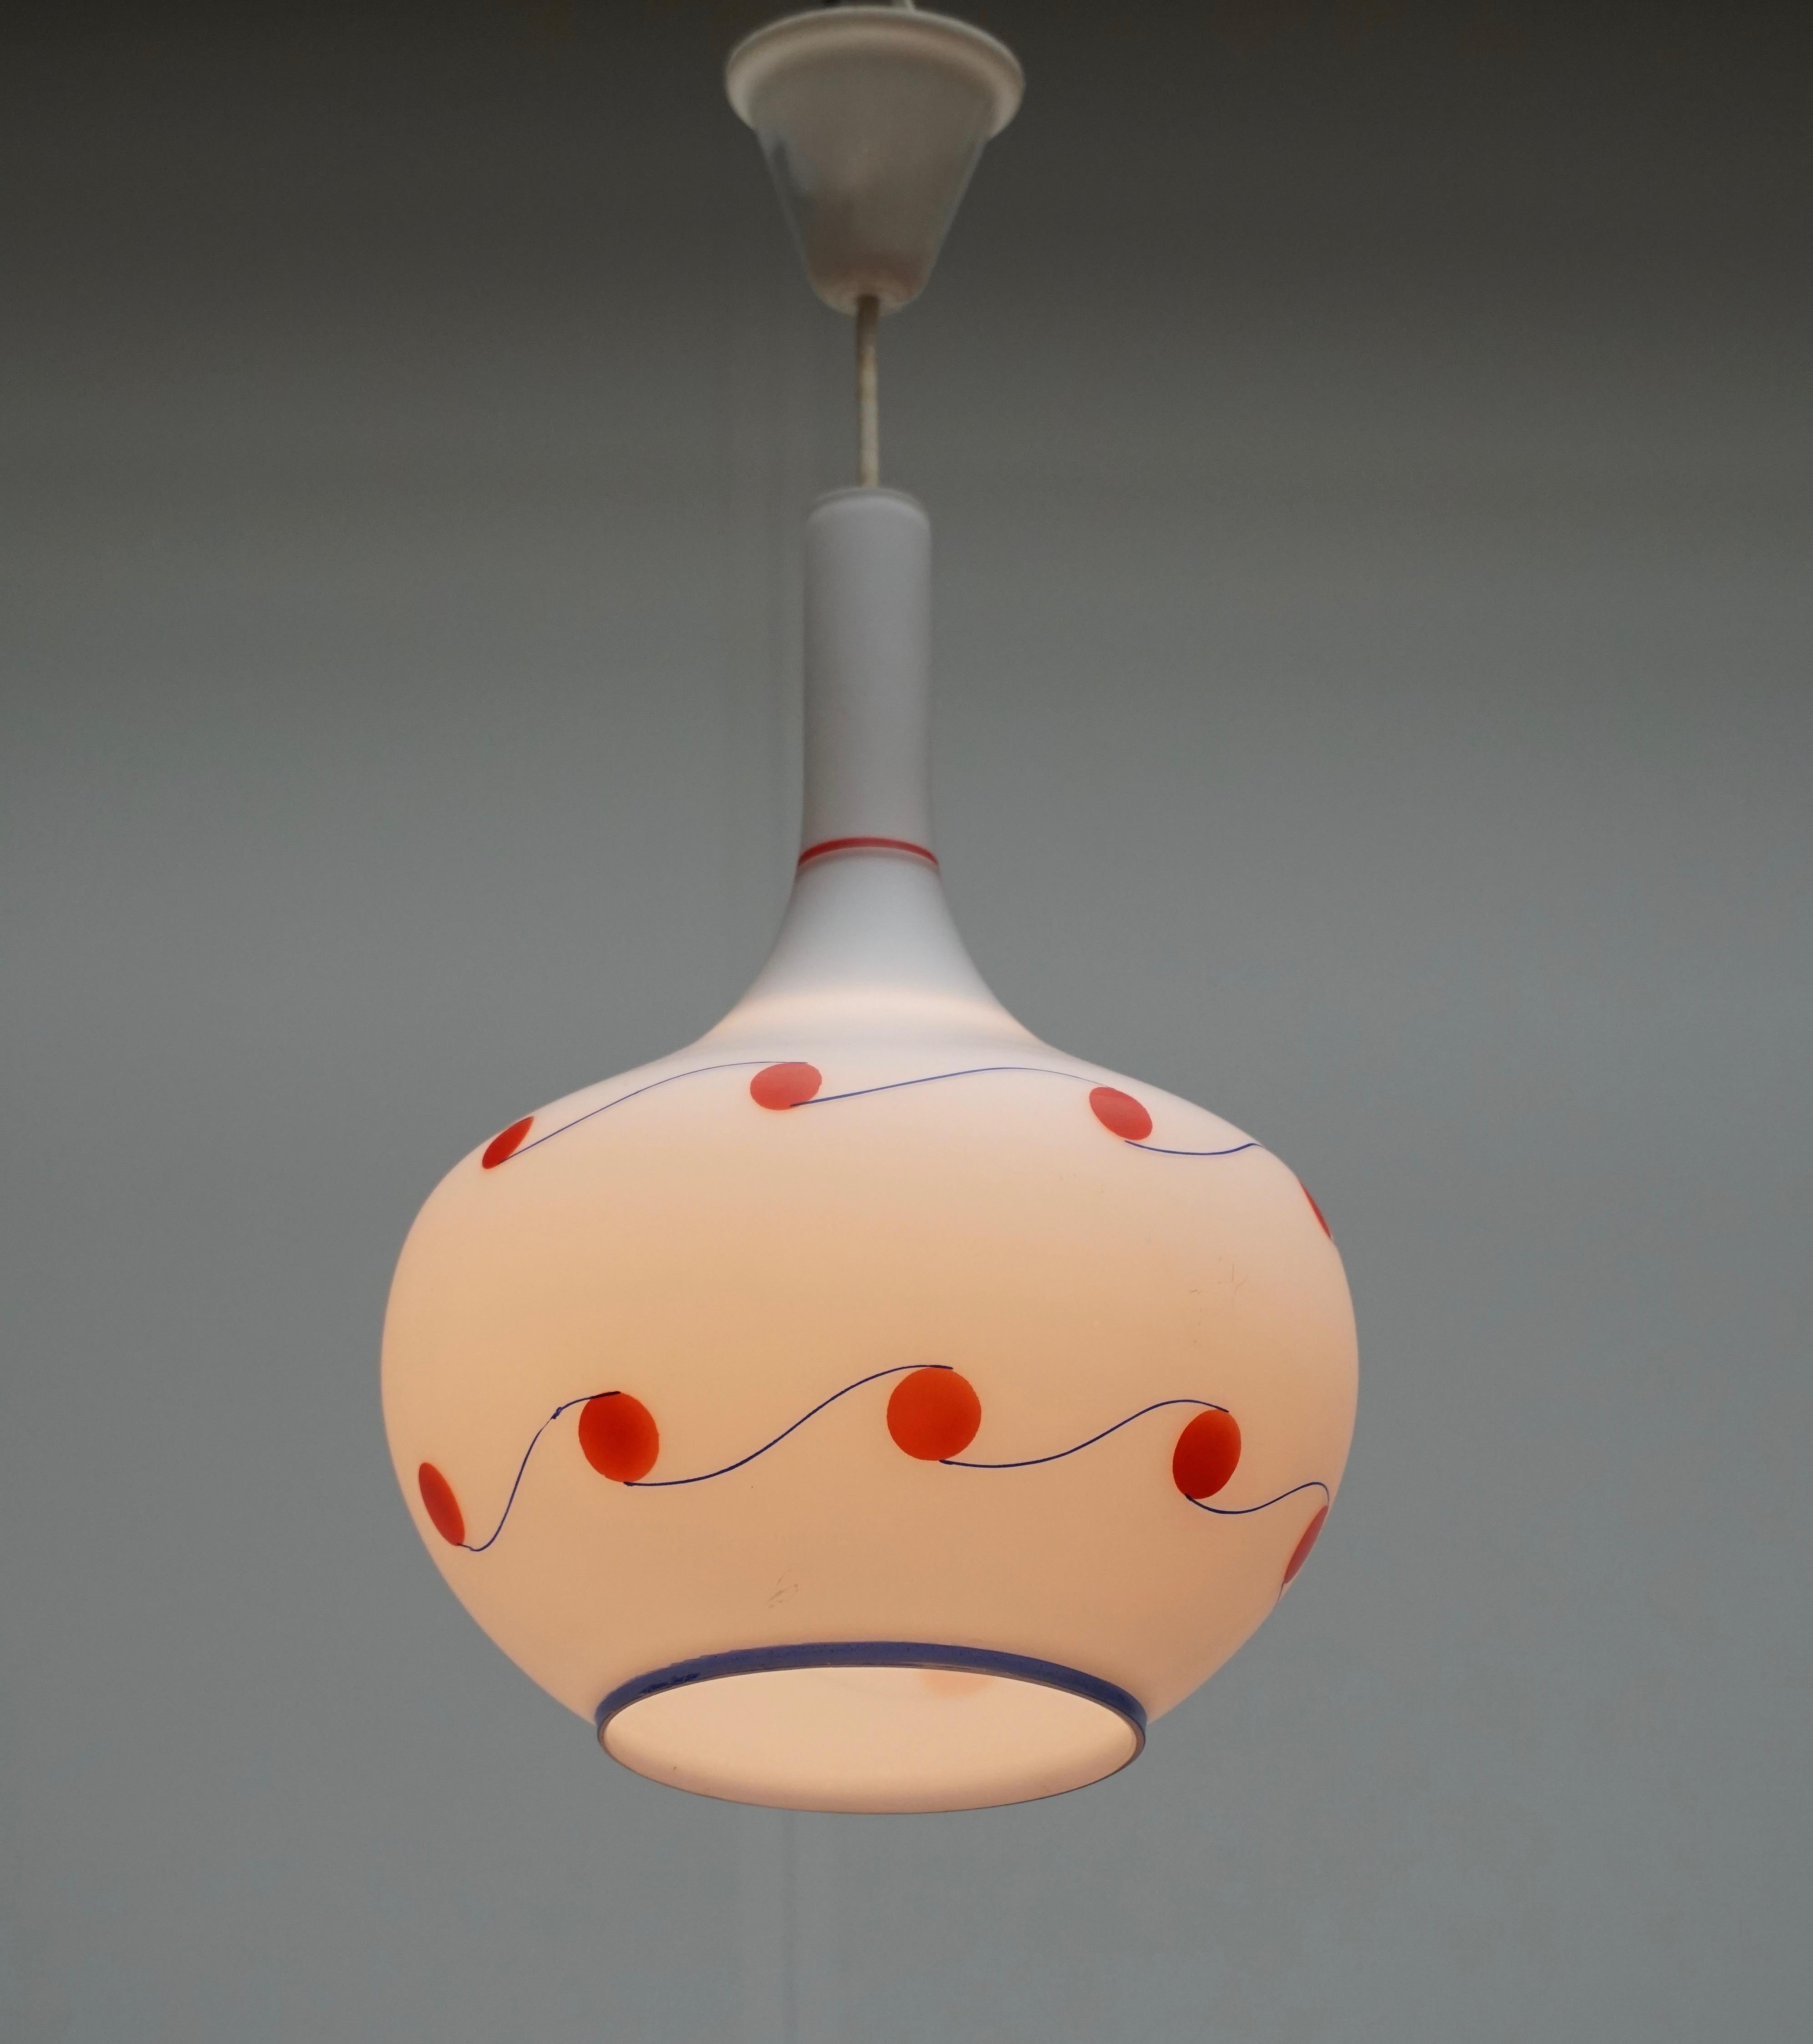 Italian Murano opaline glass ceiling lamp with red and blue decoration.
Measures: Diameter 25 cm.
Height fixture 34 cm.
Total height 47 cm.